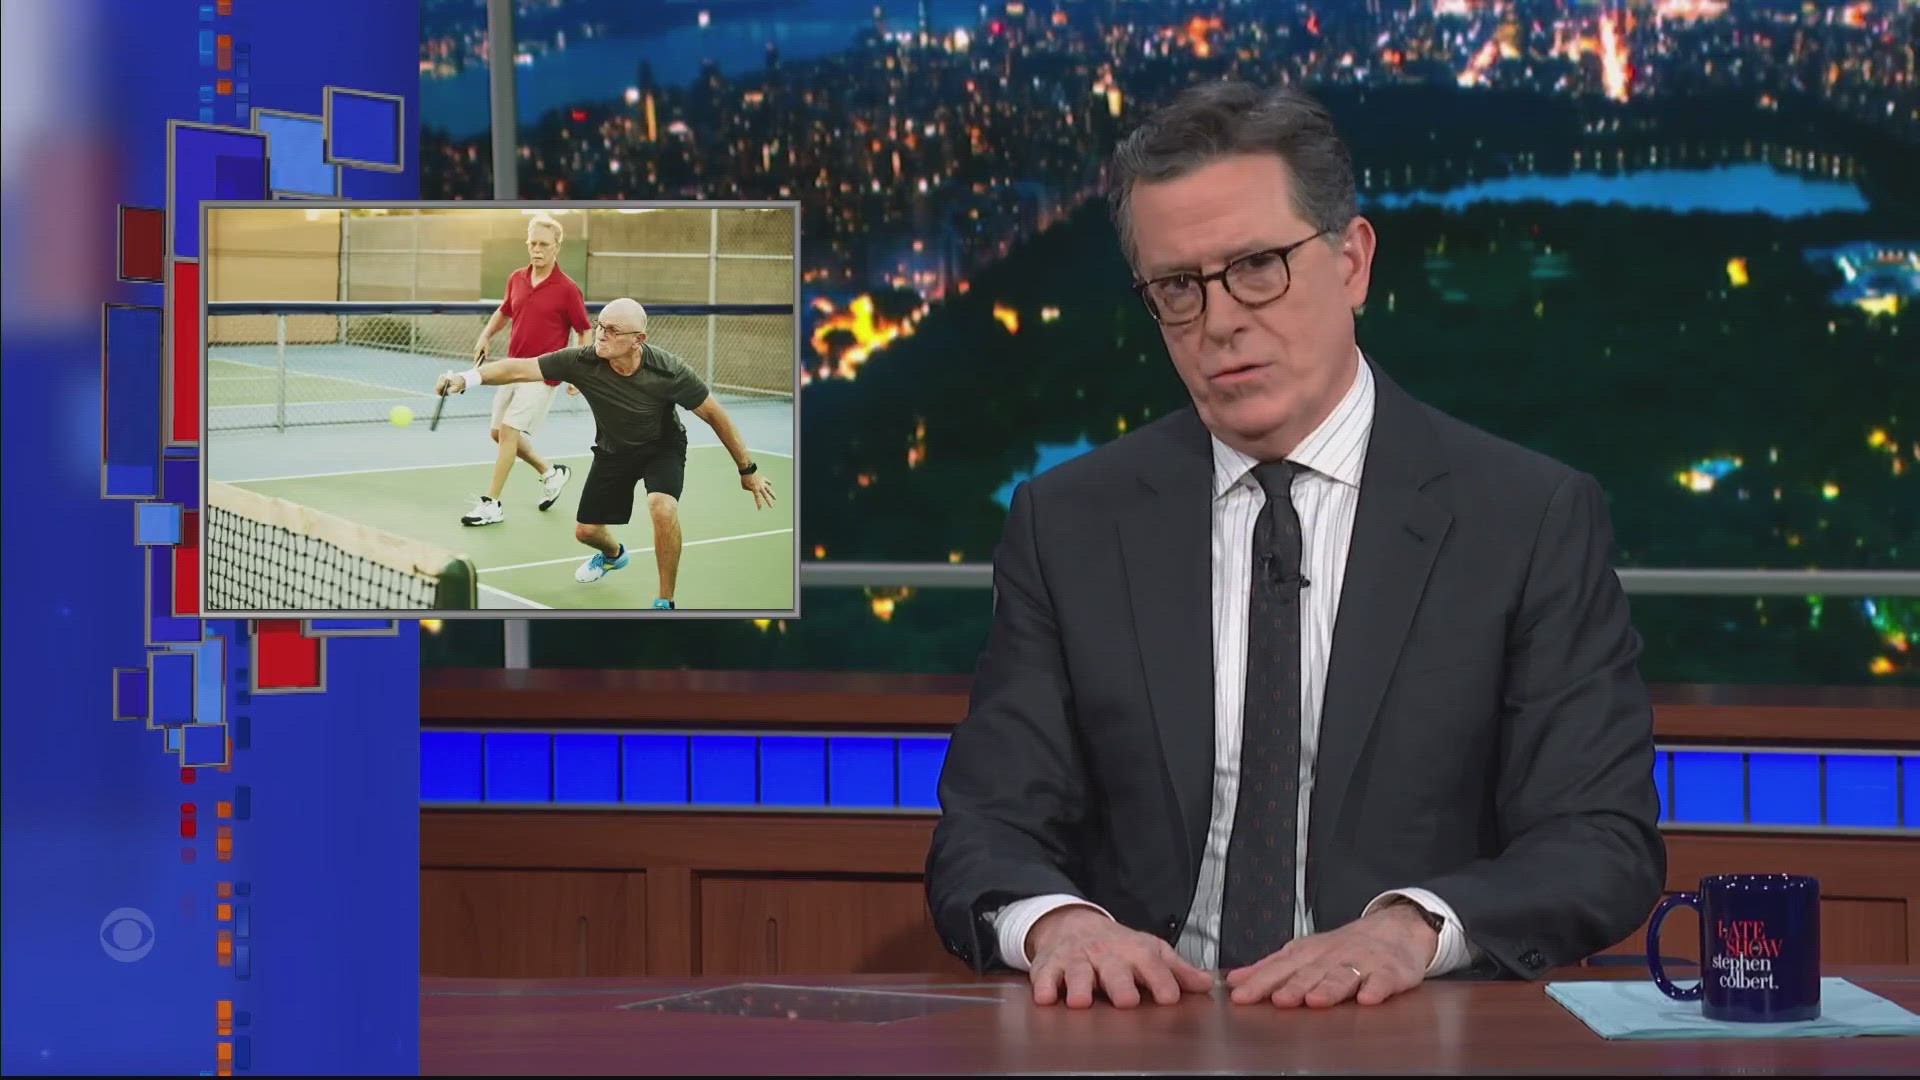 Turf battles between Team Tennis and Team Pickleball. the good folks at the Late Show with Stephen Colbert are weighing in on the matter.